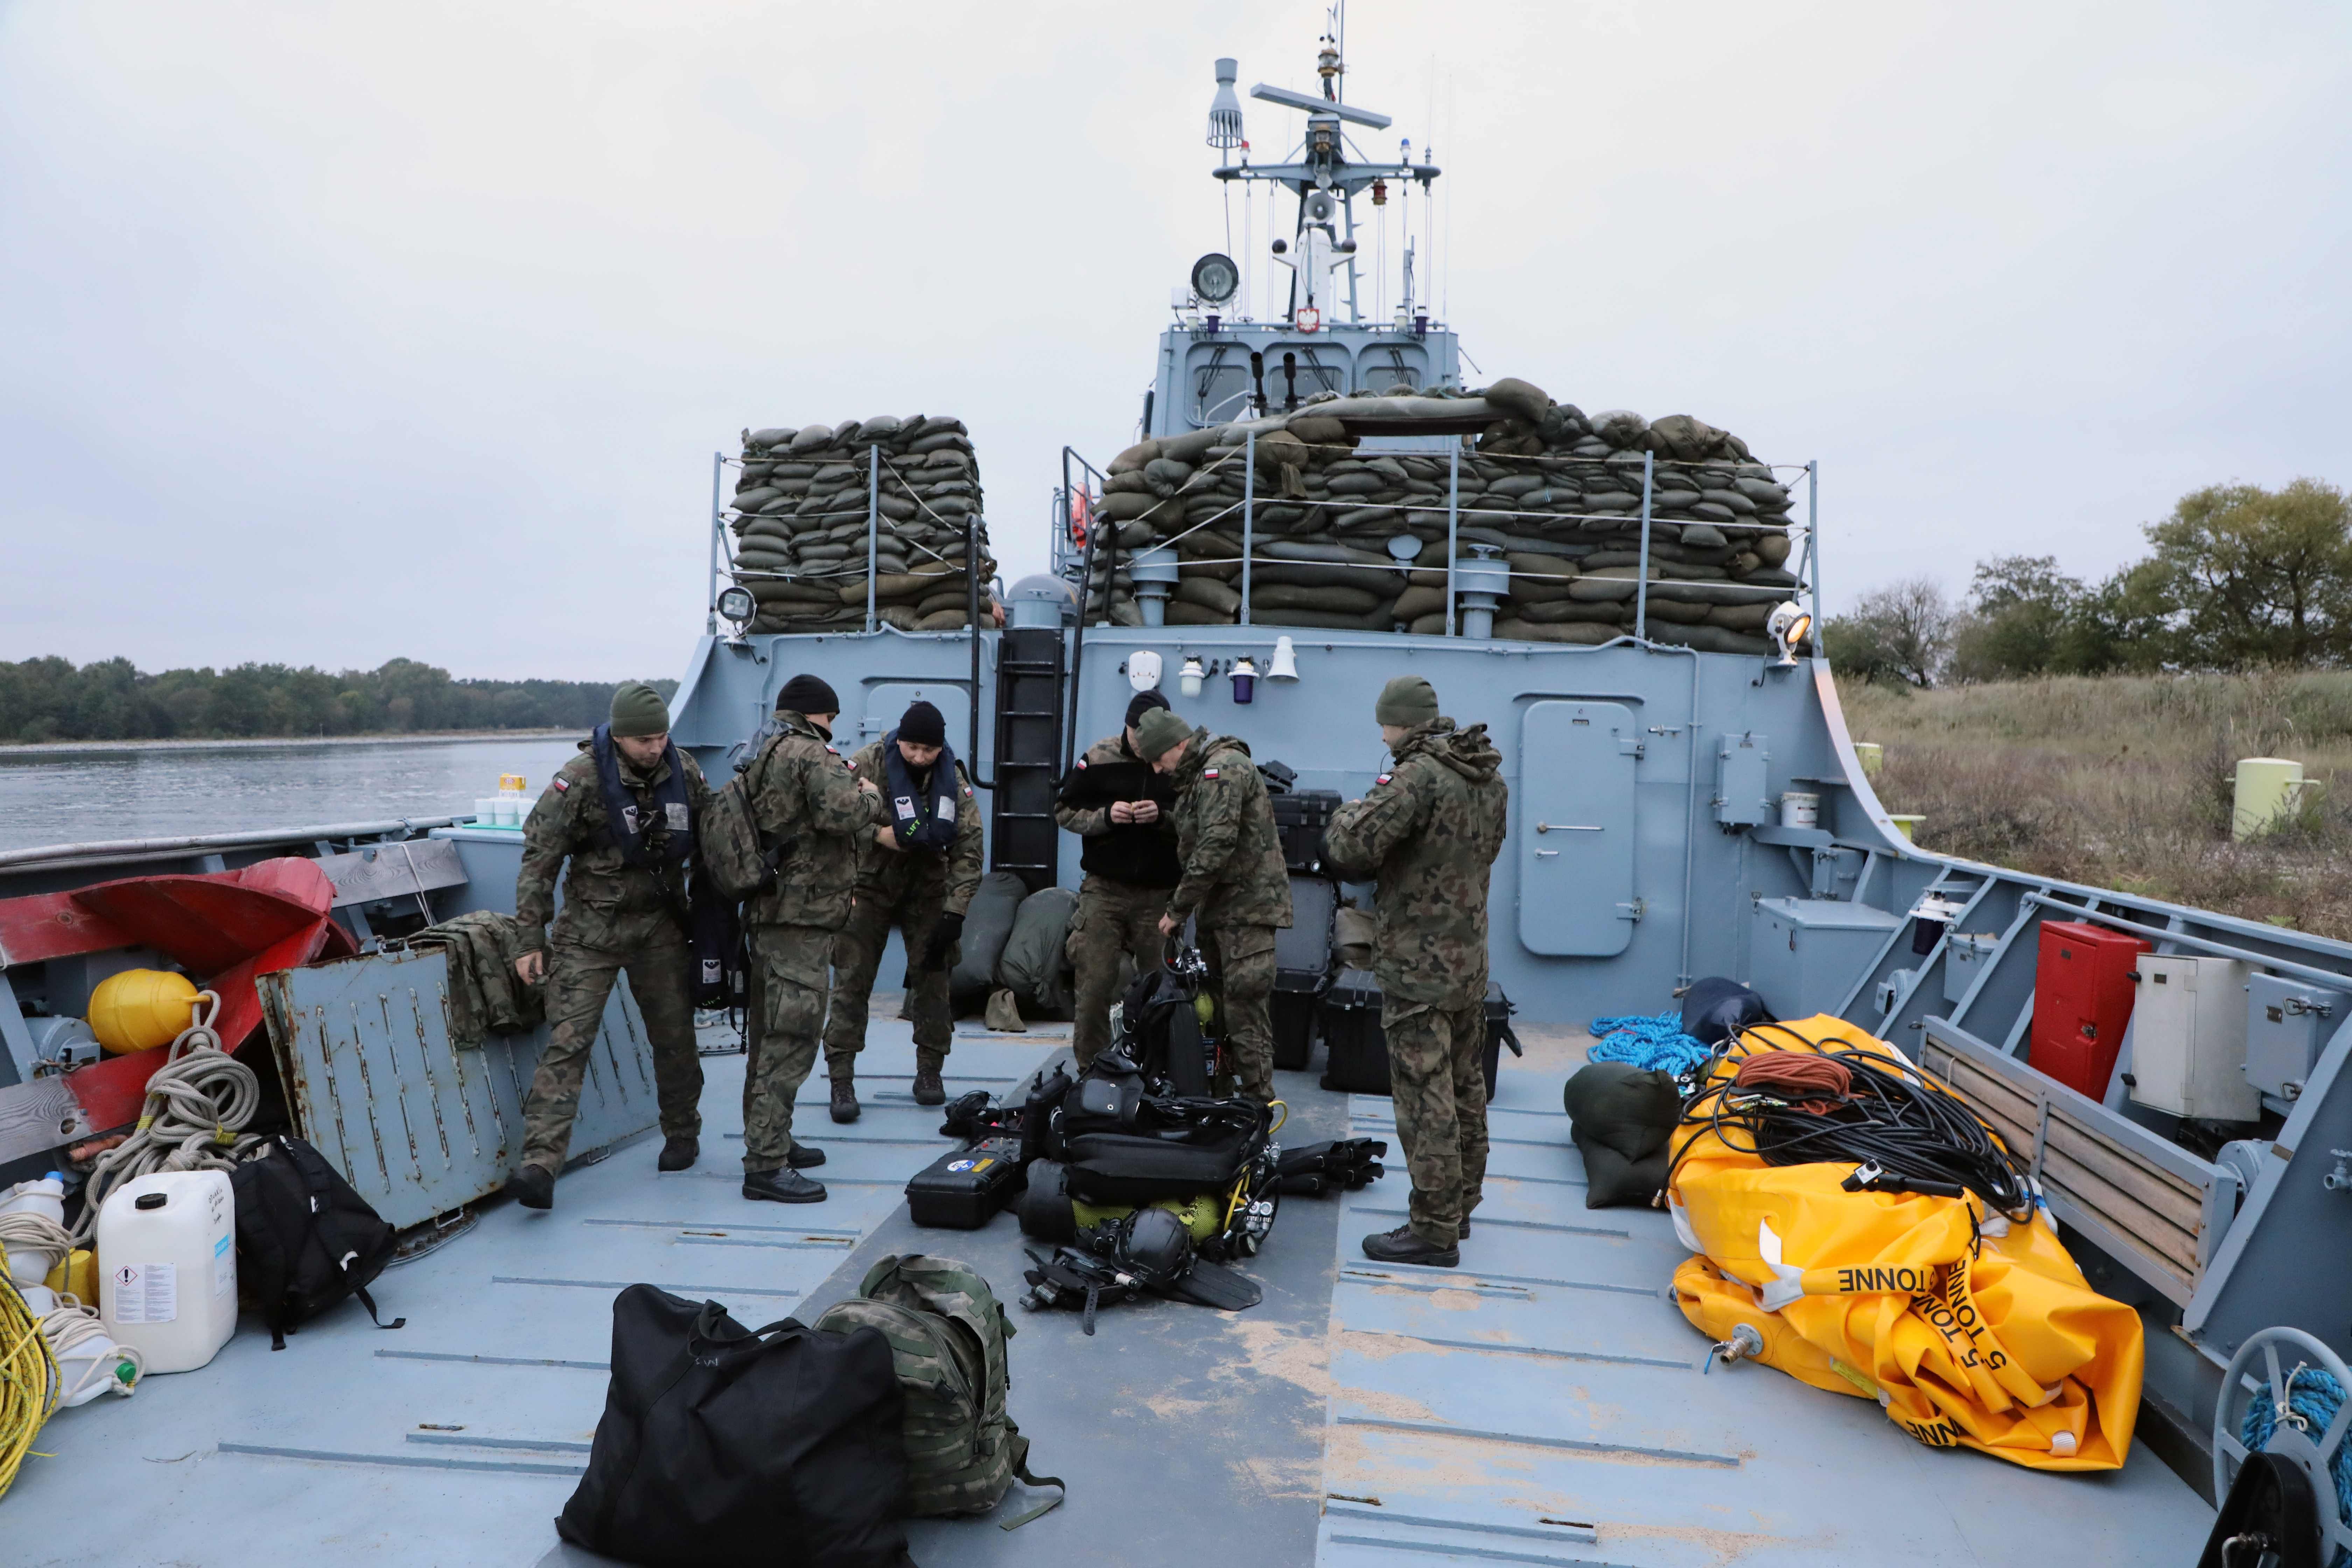 Polish Navy divers prepare the equipment to be used in the operation to defuse a WWII five-tonne underwater bomb derelict (also known as an "earthquake bomb"), in Piast, a shipping channel near the island of Karsibor, south of the city of Swinoujscie, Poland, on October 12, 2020. - Hundreds of residents were evacuated on October 12, 2020, as Polish military divers began a high-risk operation to defuse a British WWII 'Tallboy' bomb dropped by the Royal Air Force in an attack on a Nazi warship in 1945, discovered in a channel near the Baltic Sea. Credit: AFP